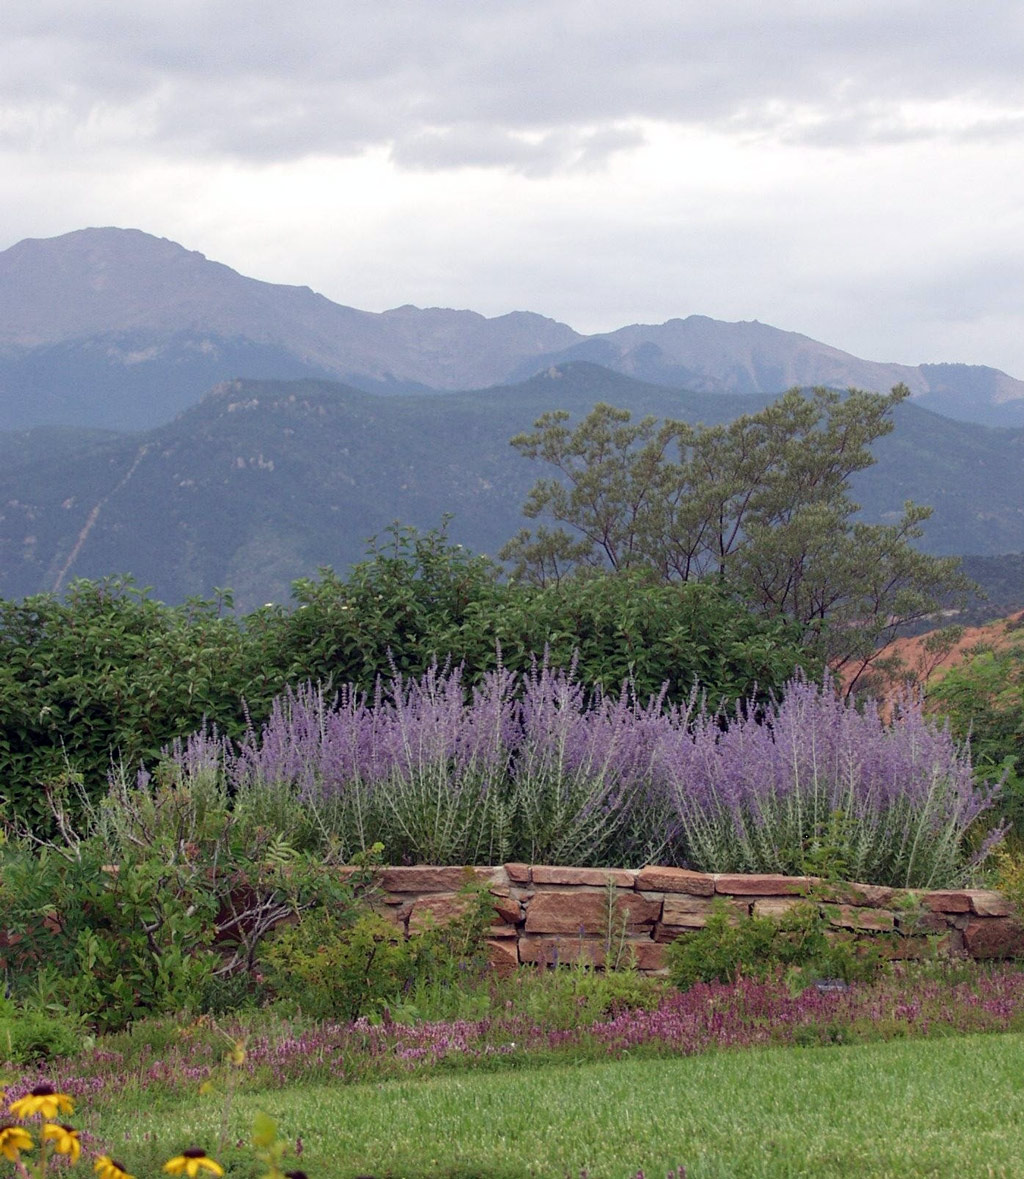 The Colorado Springs Utilities Xeriscape Garden is designed to demonstrate 